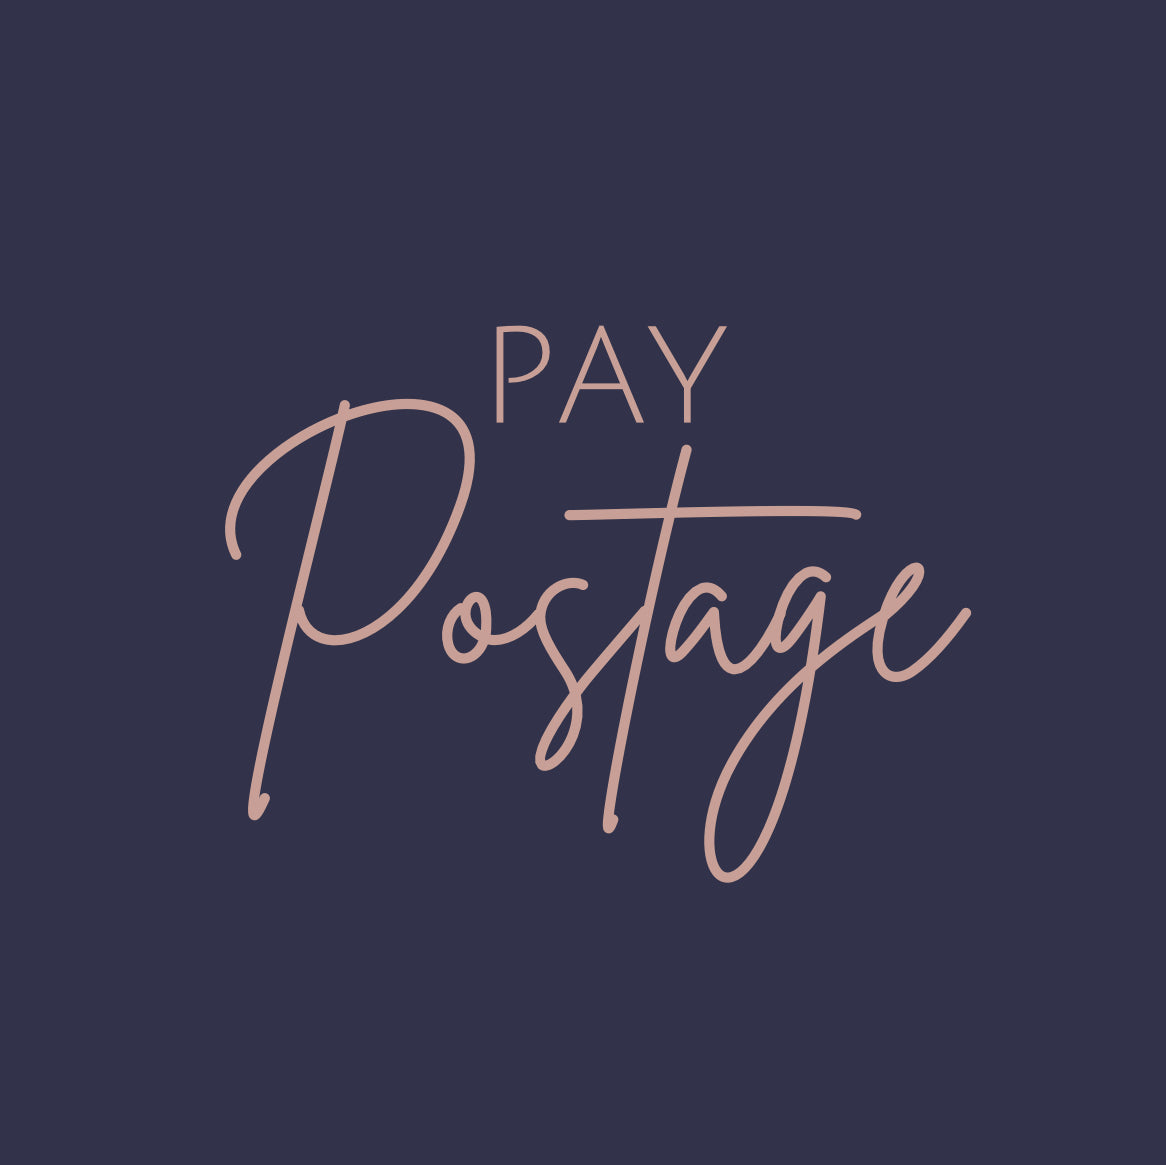 Pay Postage